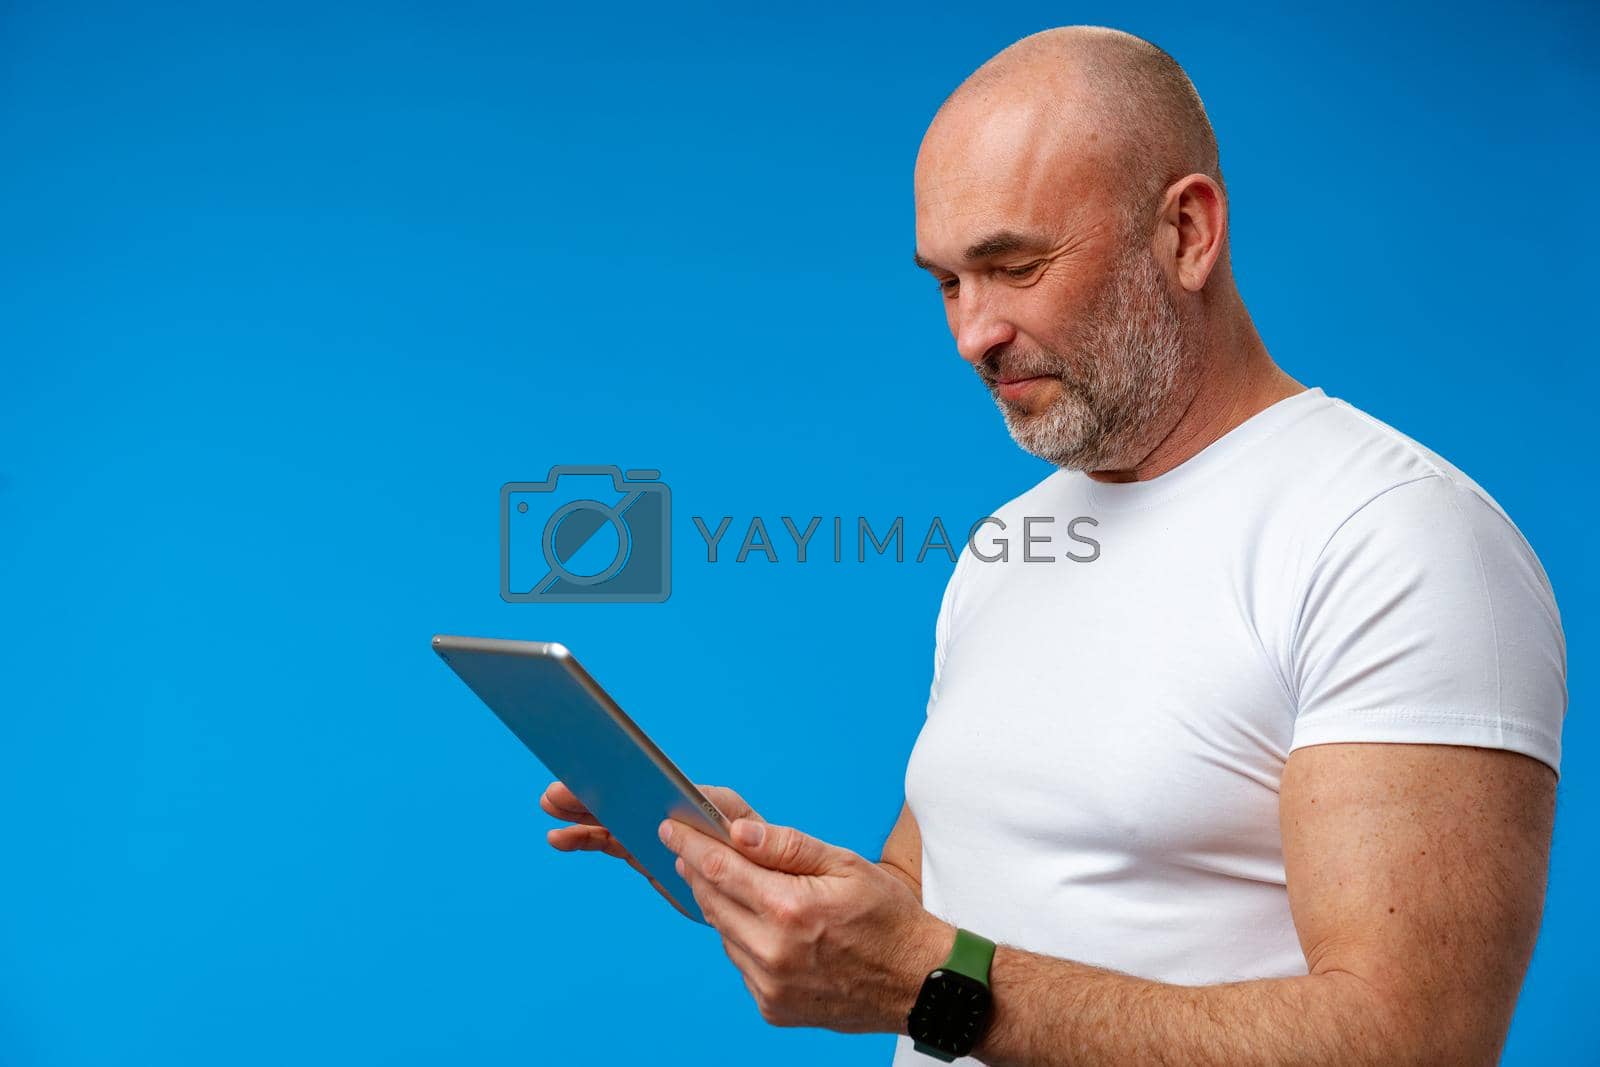 Royalty free image of Handsome middle age man with digital tablet against blue background by Fabrikasimf